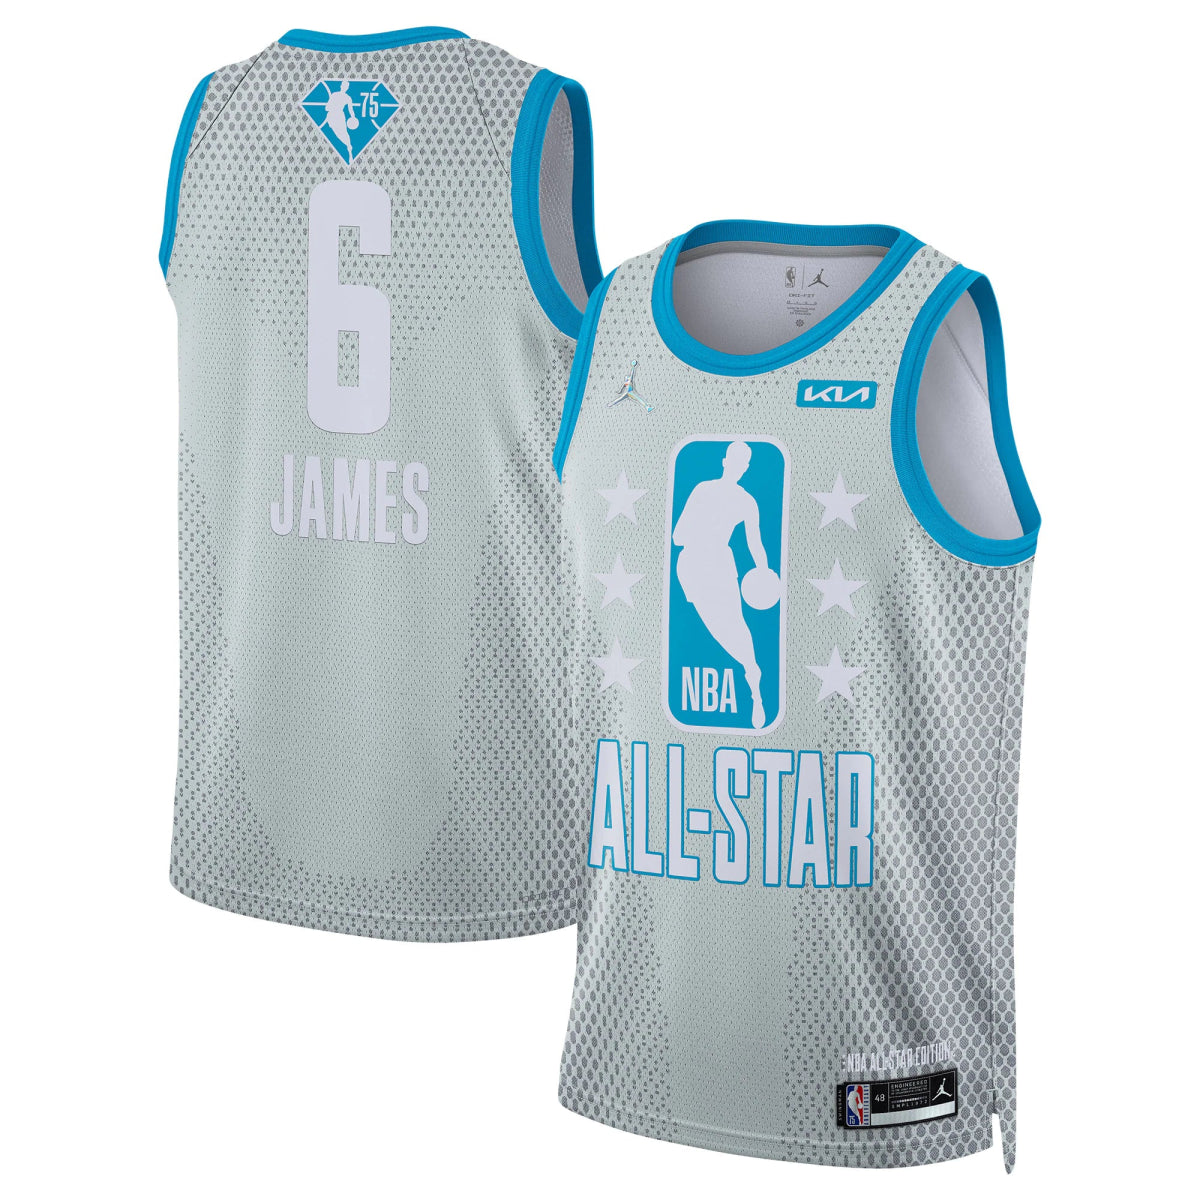 Shop Los Angeles Jersey Clippers with great discounts and prices